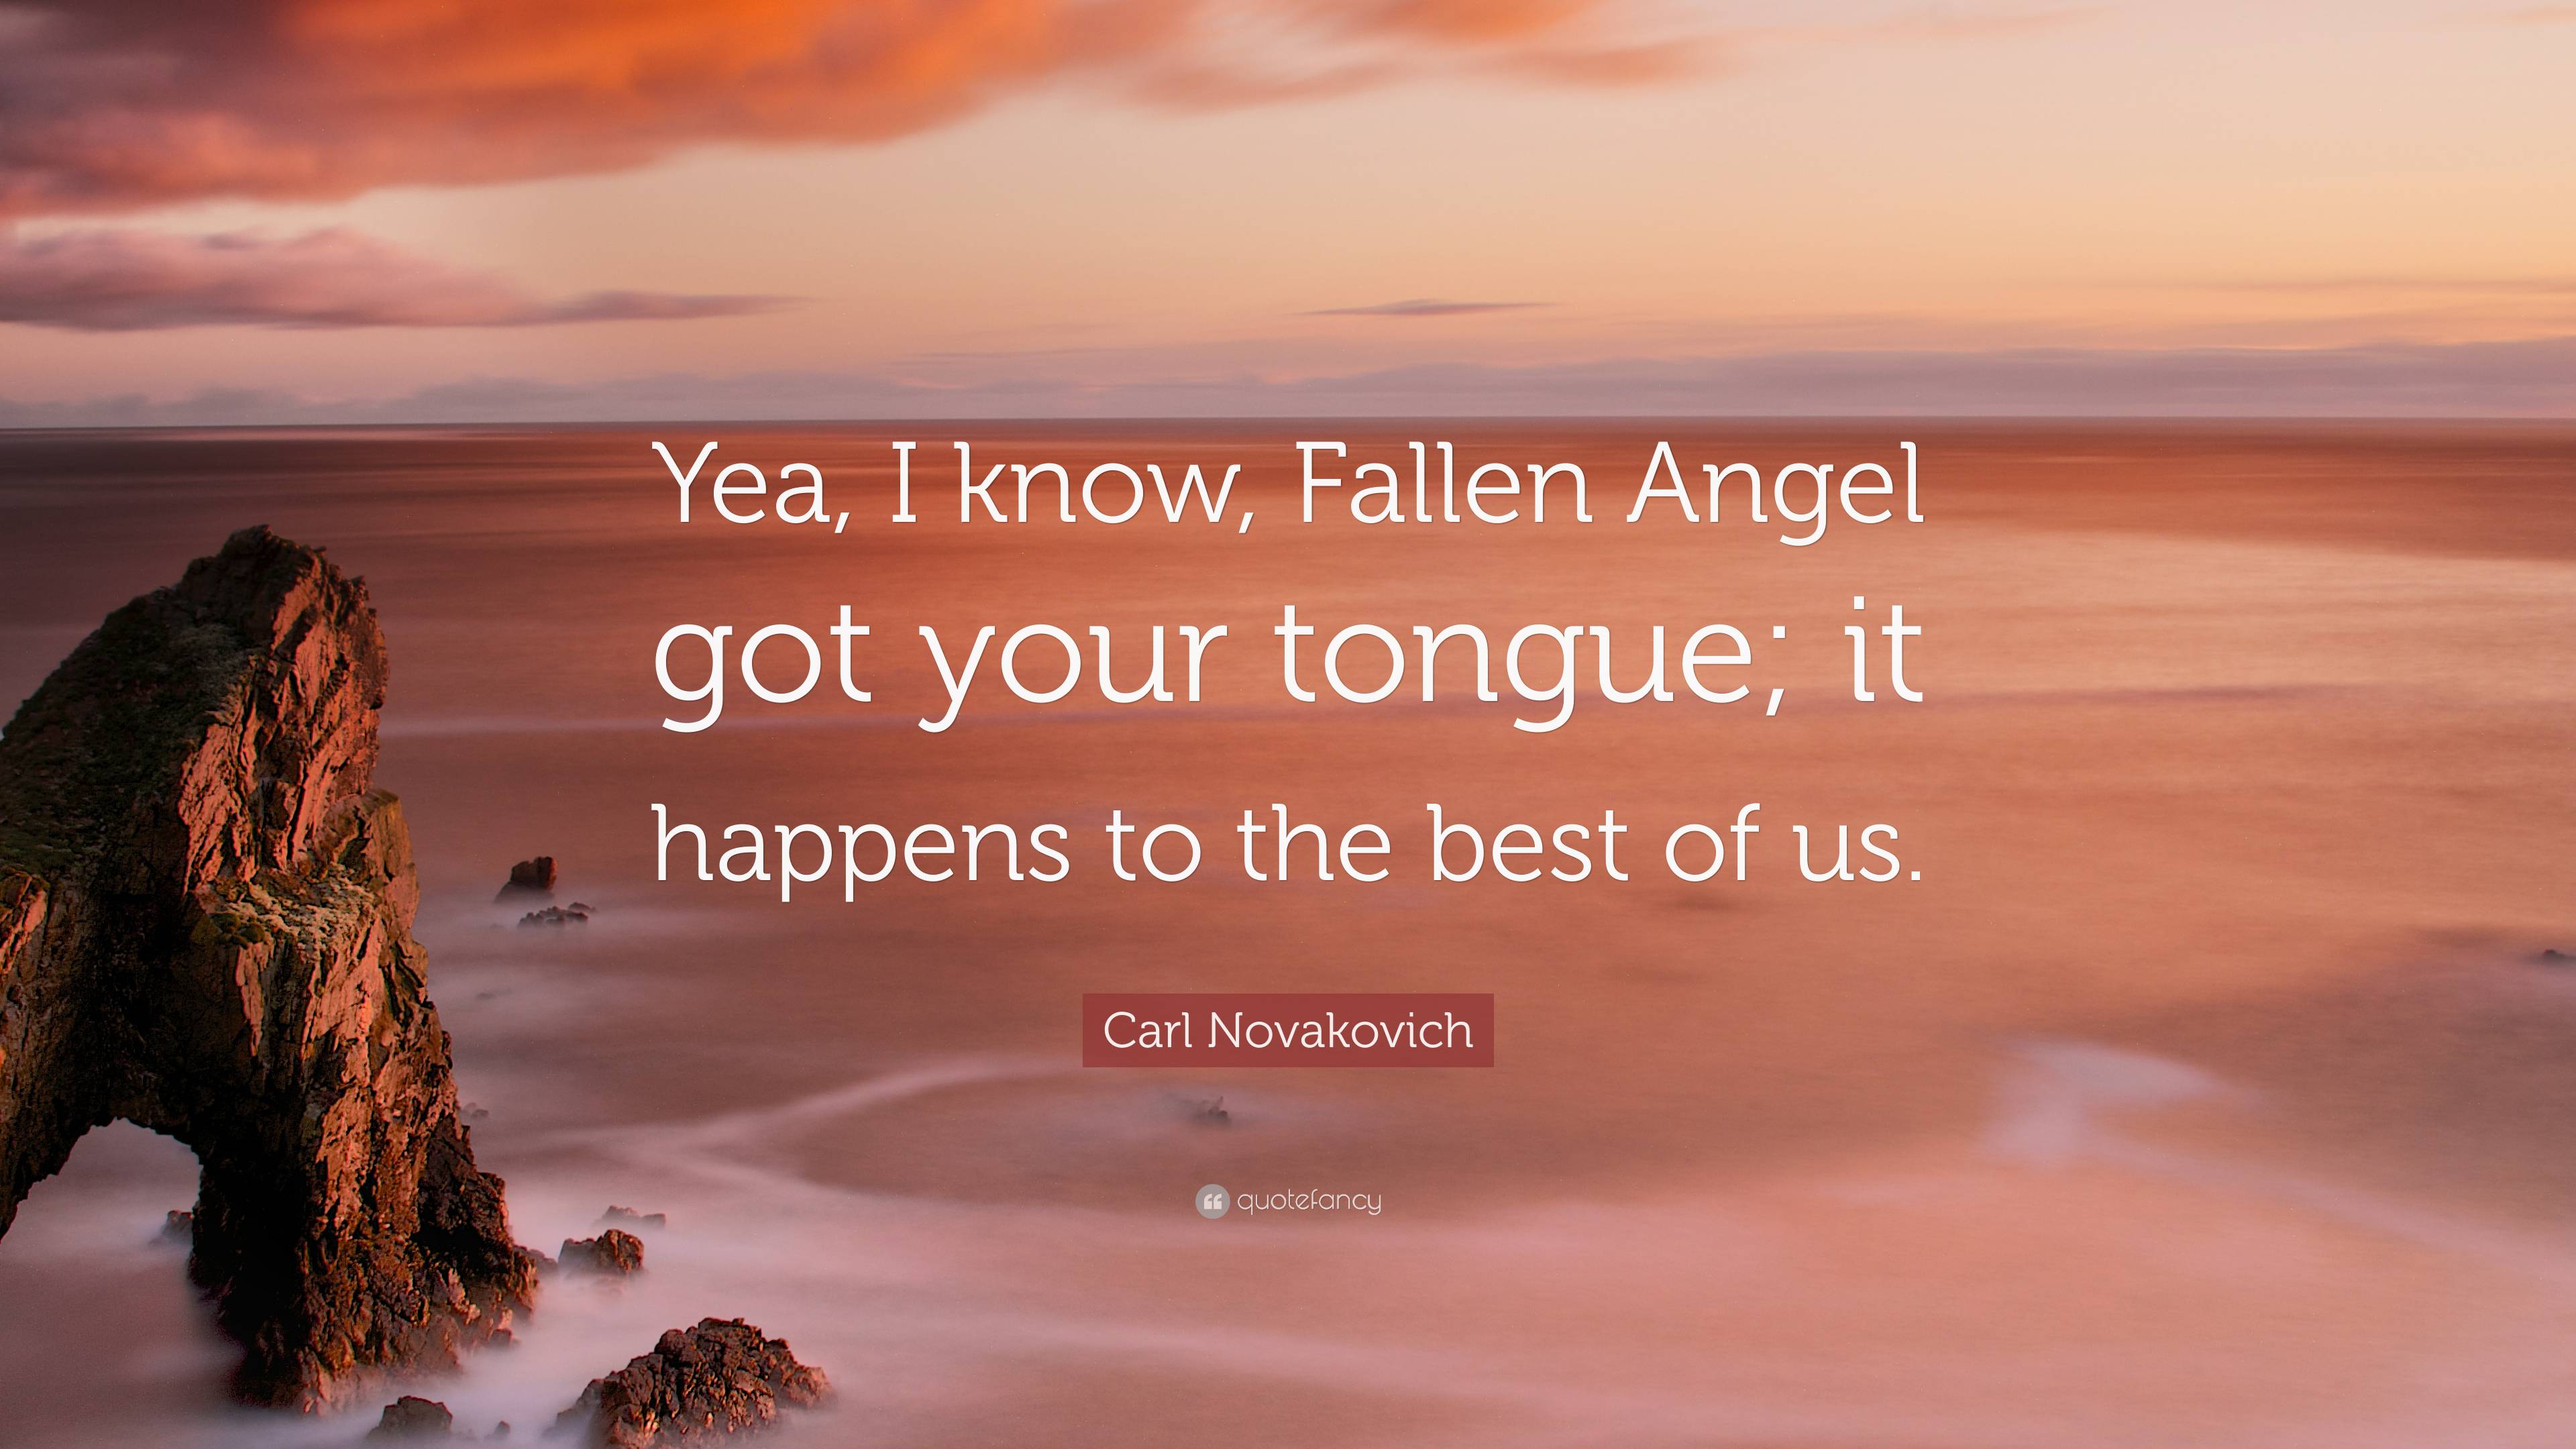 Carl Novakovich Quote: “Yea, I know, Fallen Angel got your tongue; it happens  to the best